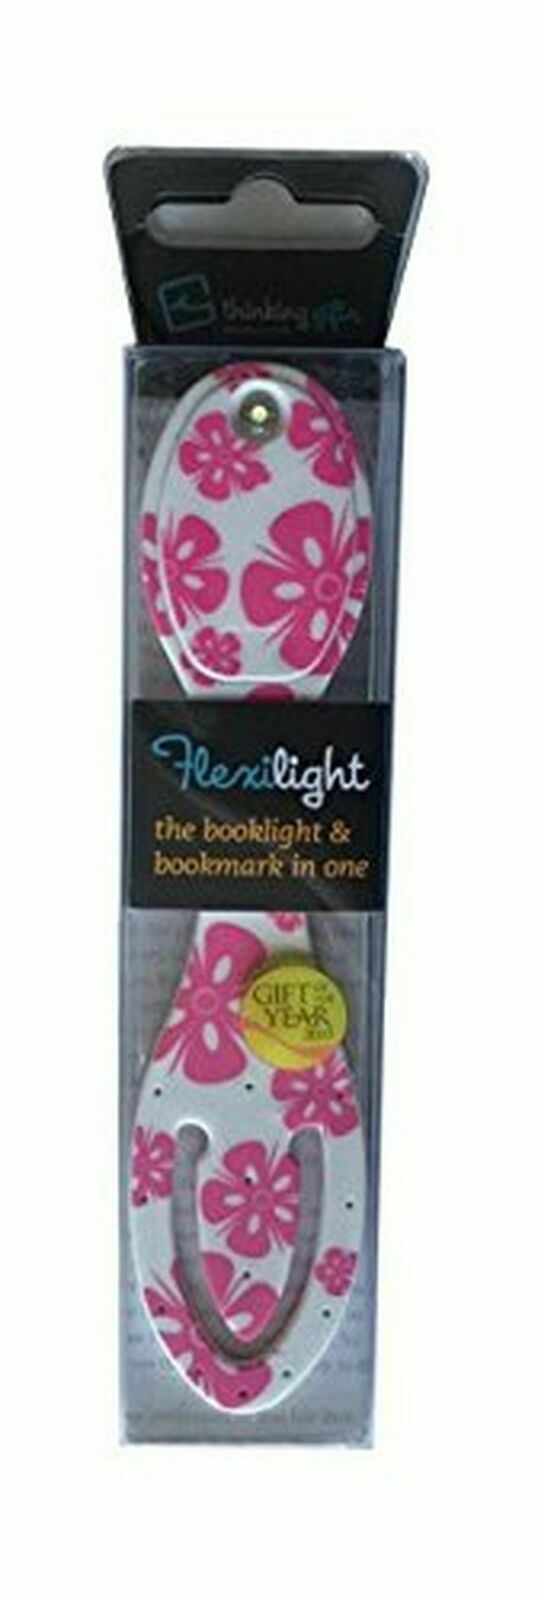 Flexlight The Booklight & Bookmark In One Pink Camo